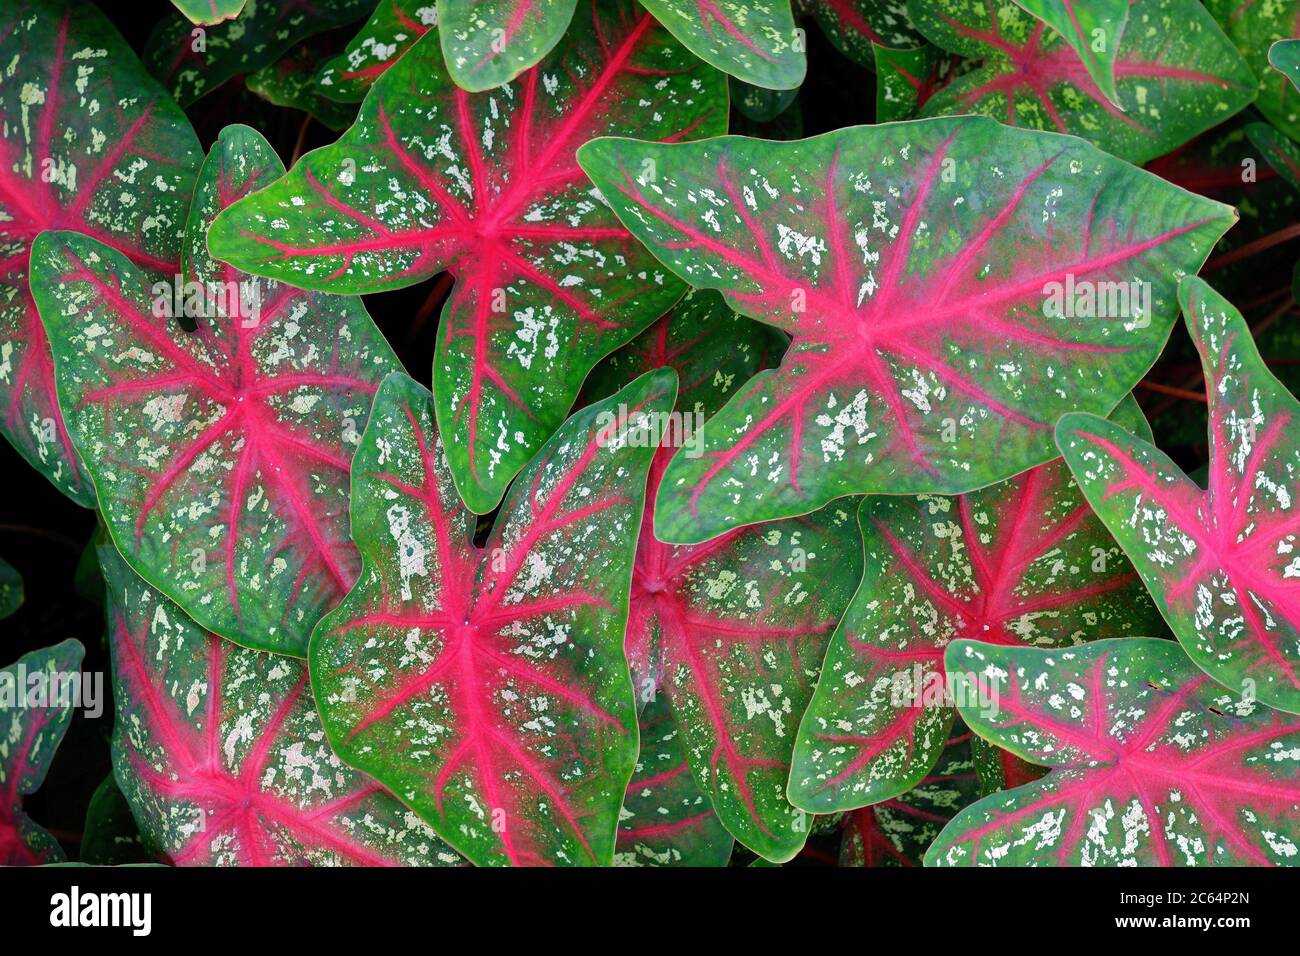 bicolor caladium in red and green leaf Stock Photo